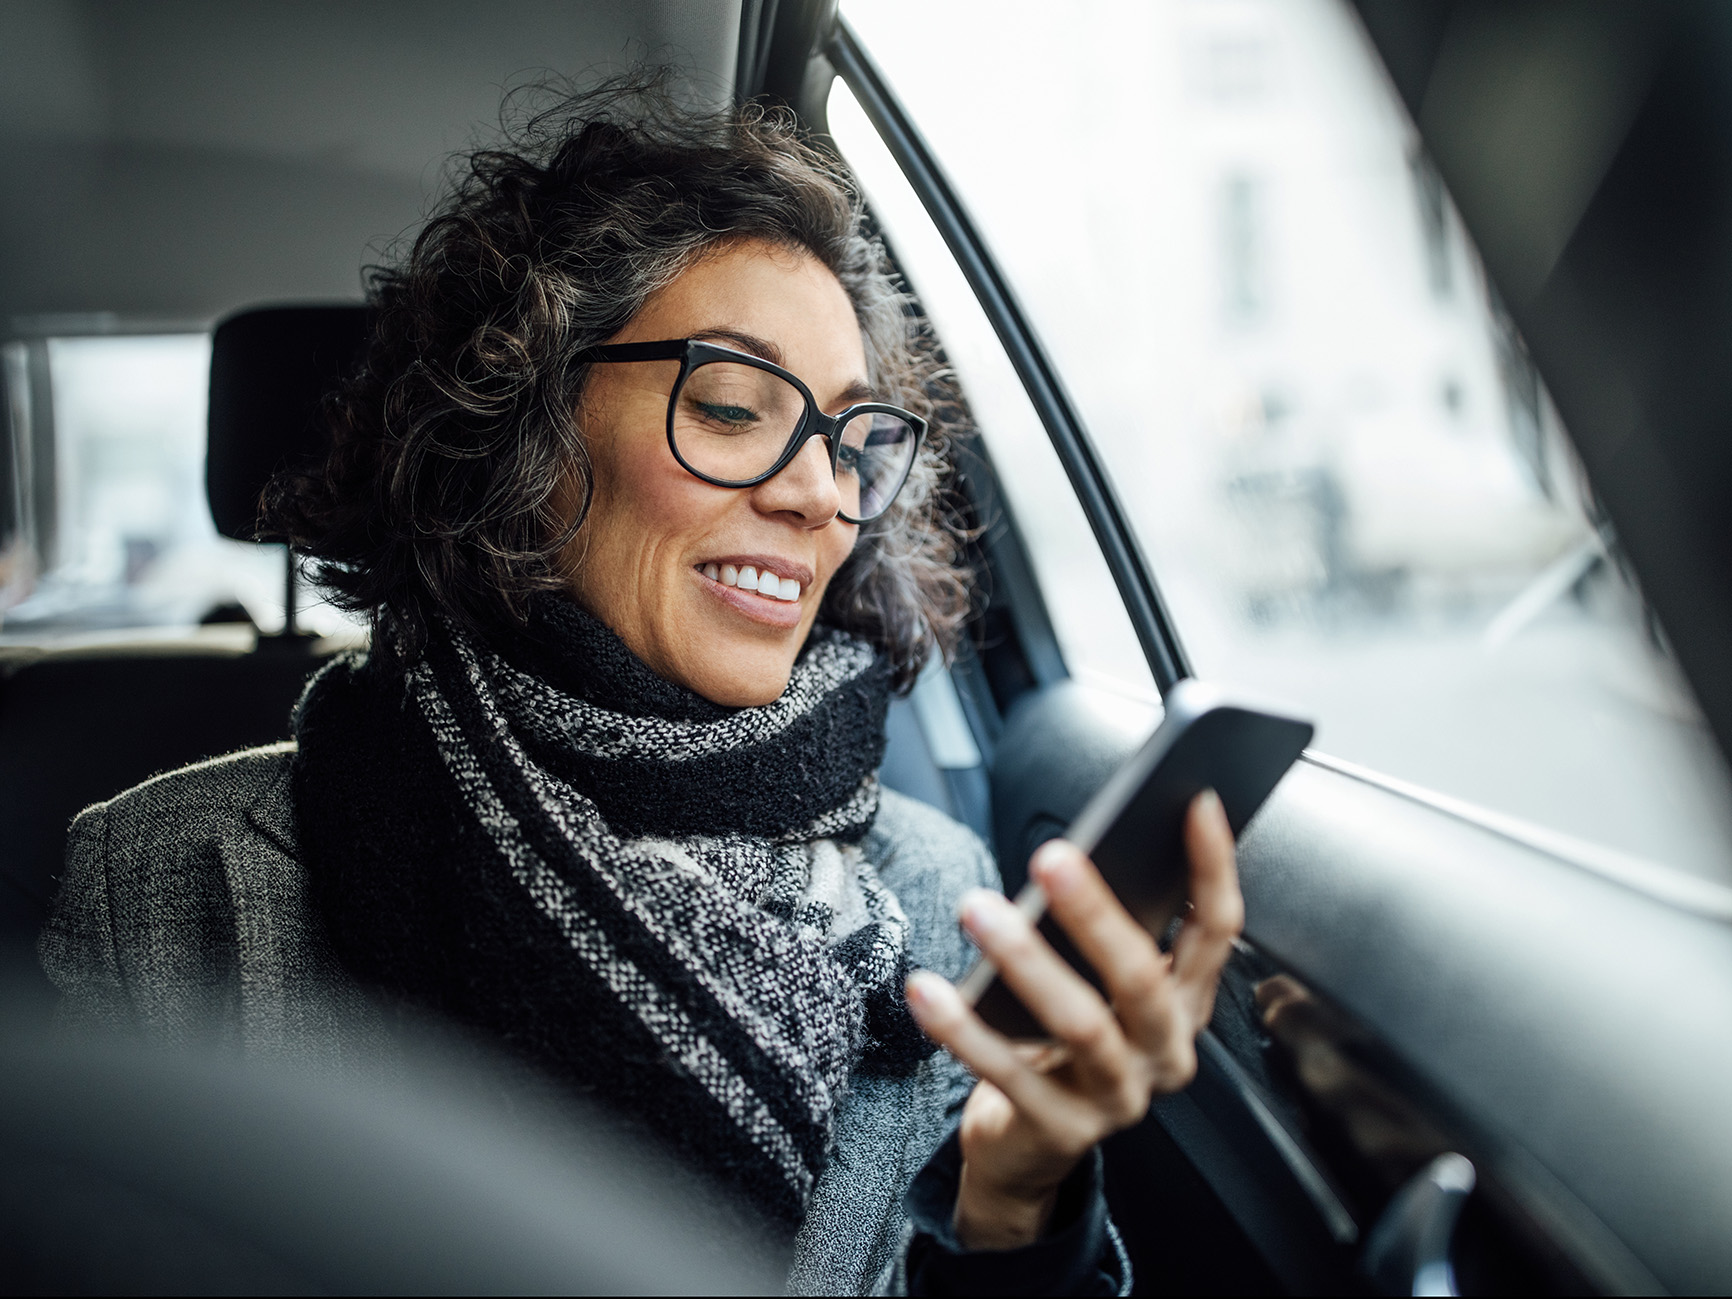 Woman in car looking at phone